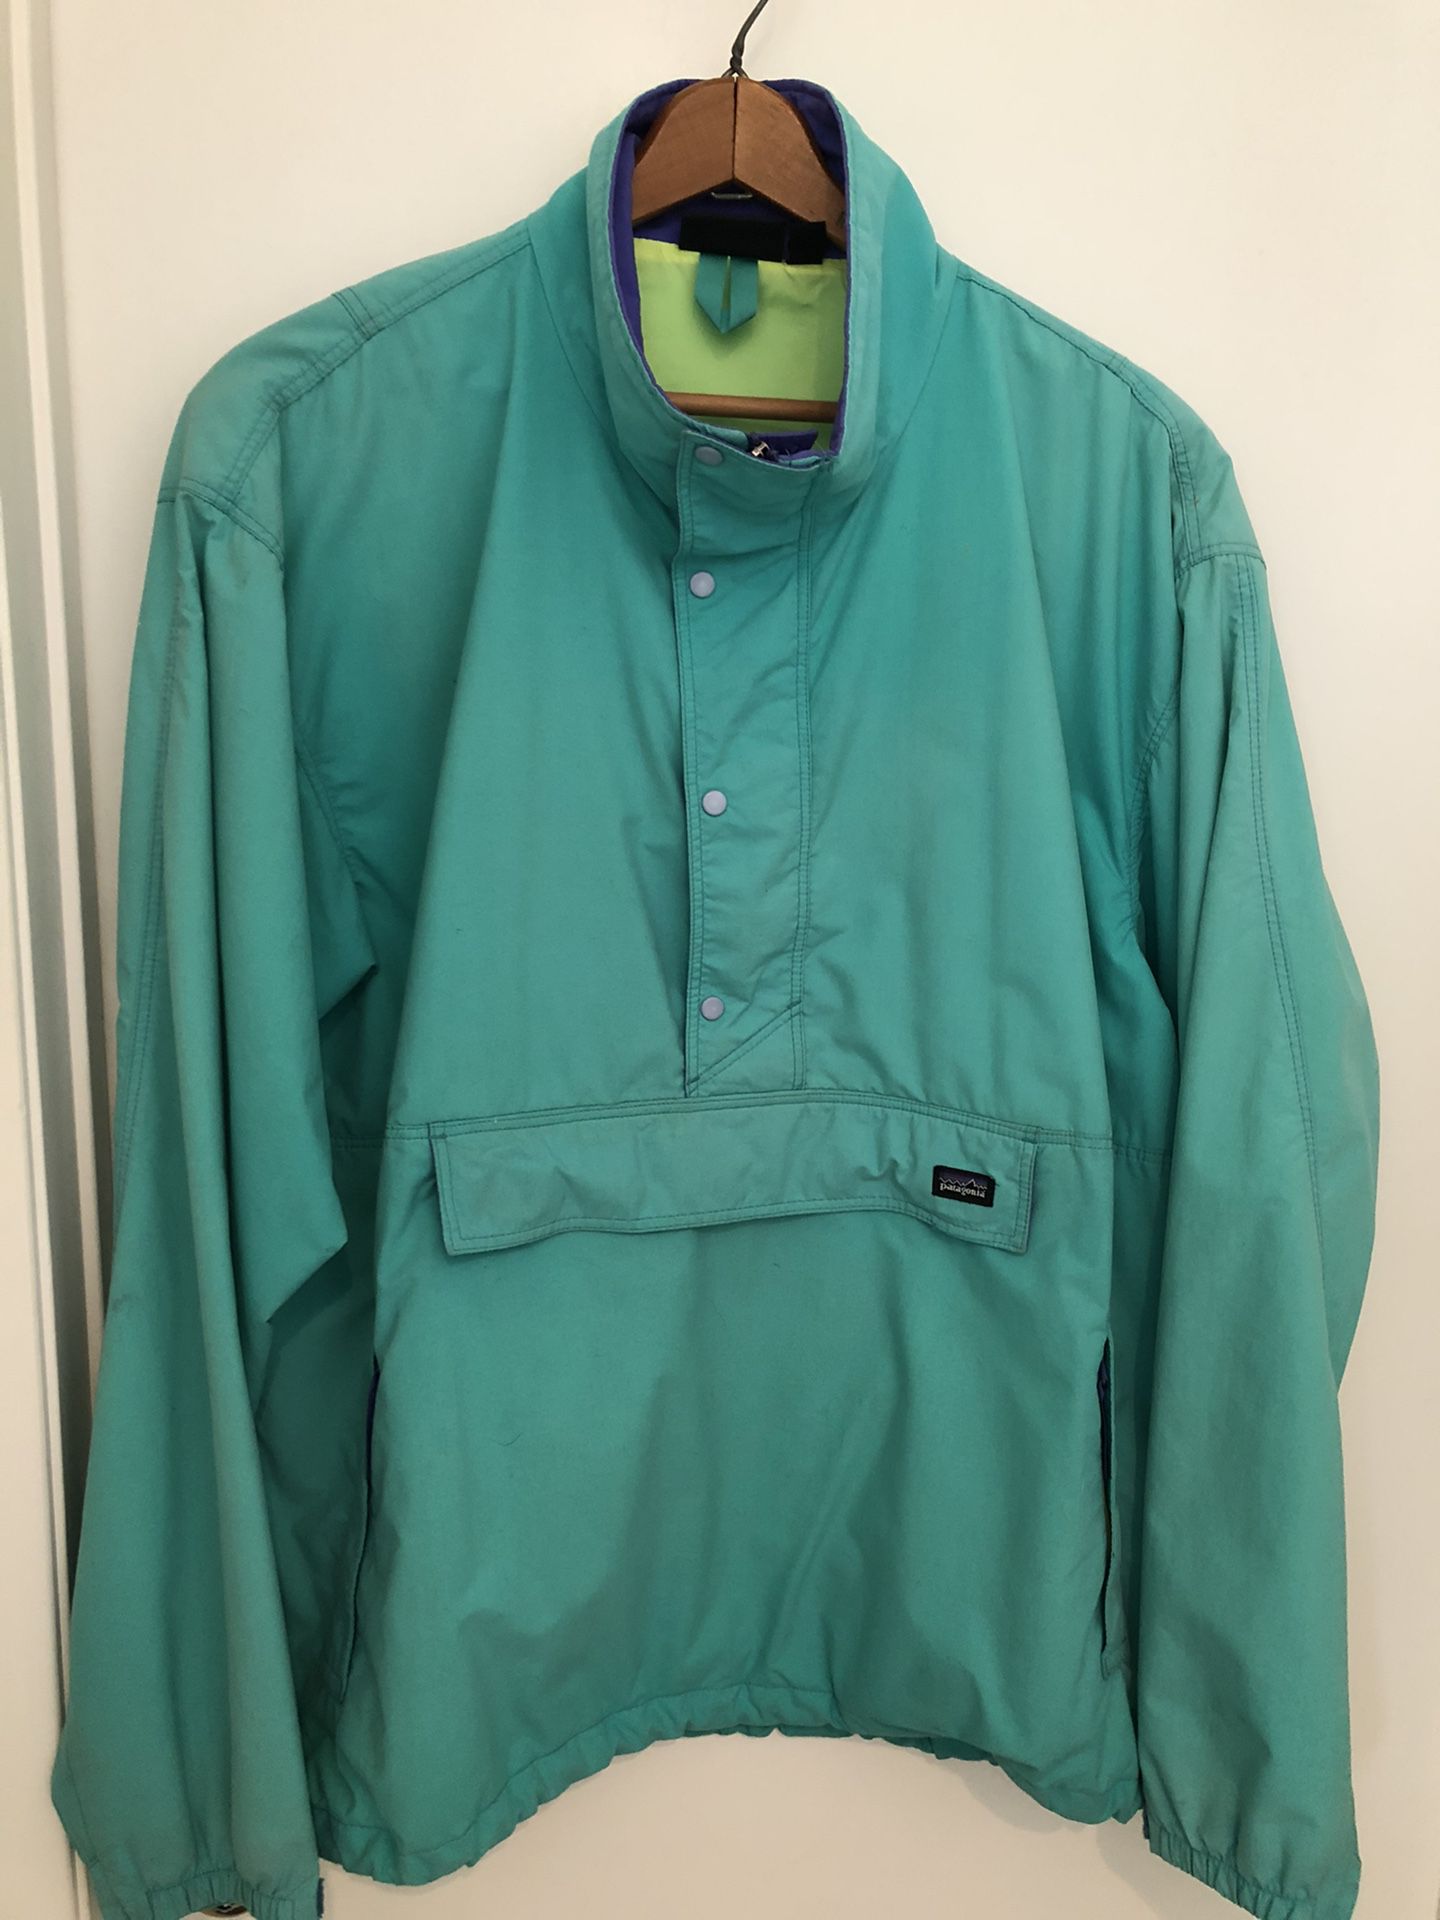 Patagonia wind shell